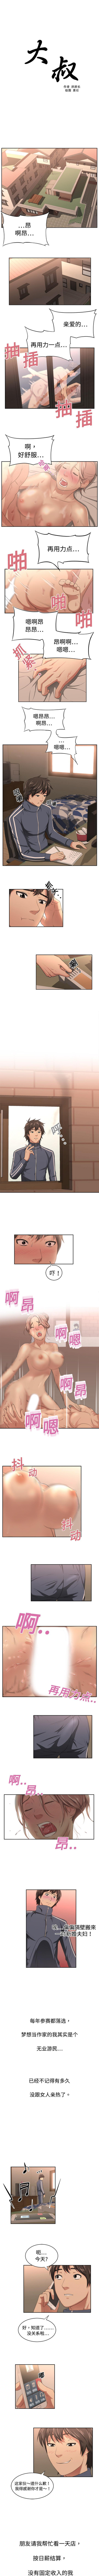 Chacal 大叔 1-25 Dorm - Page 4